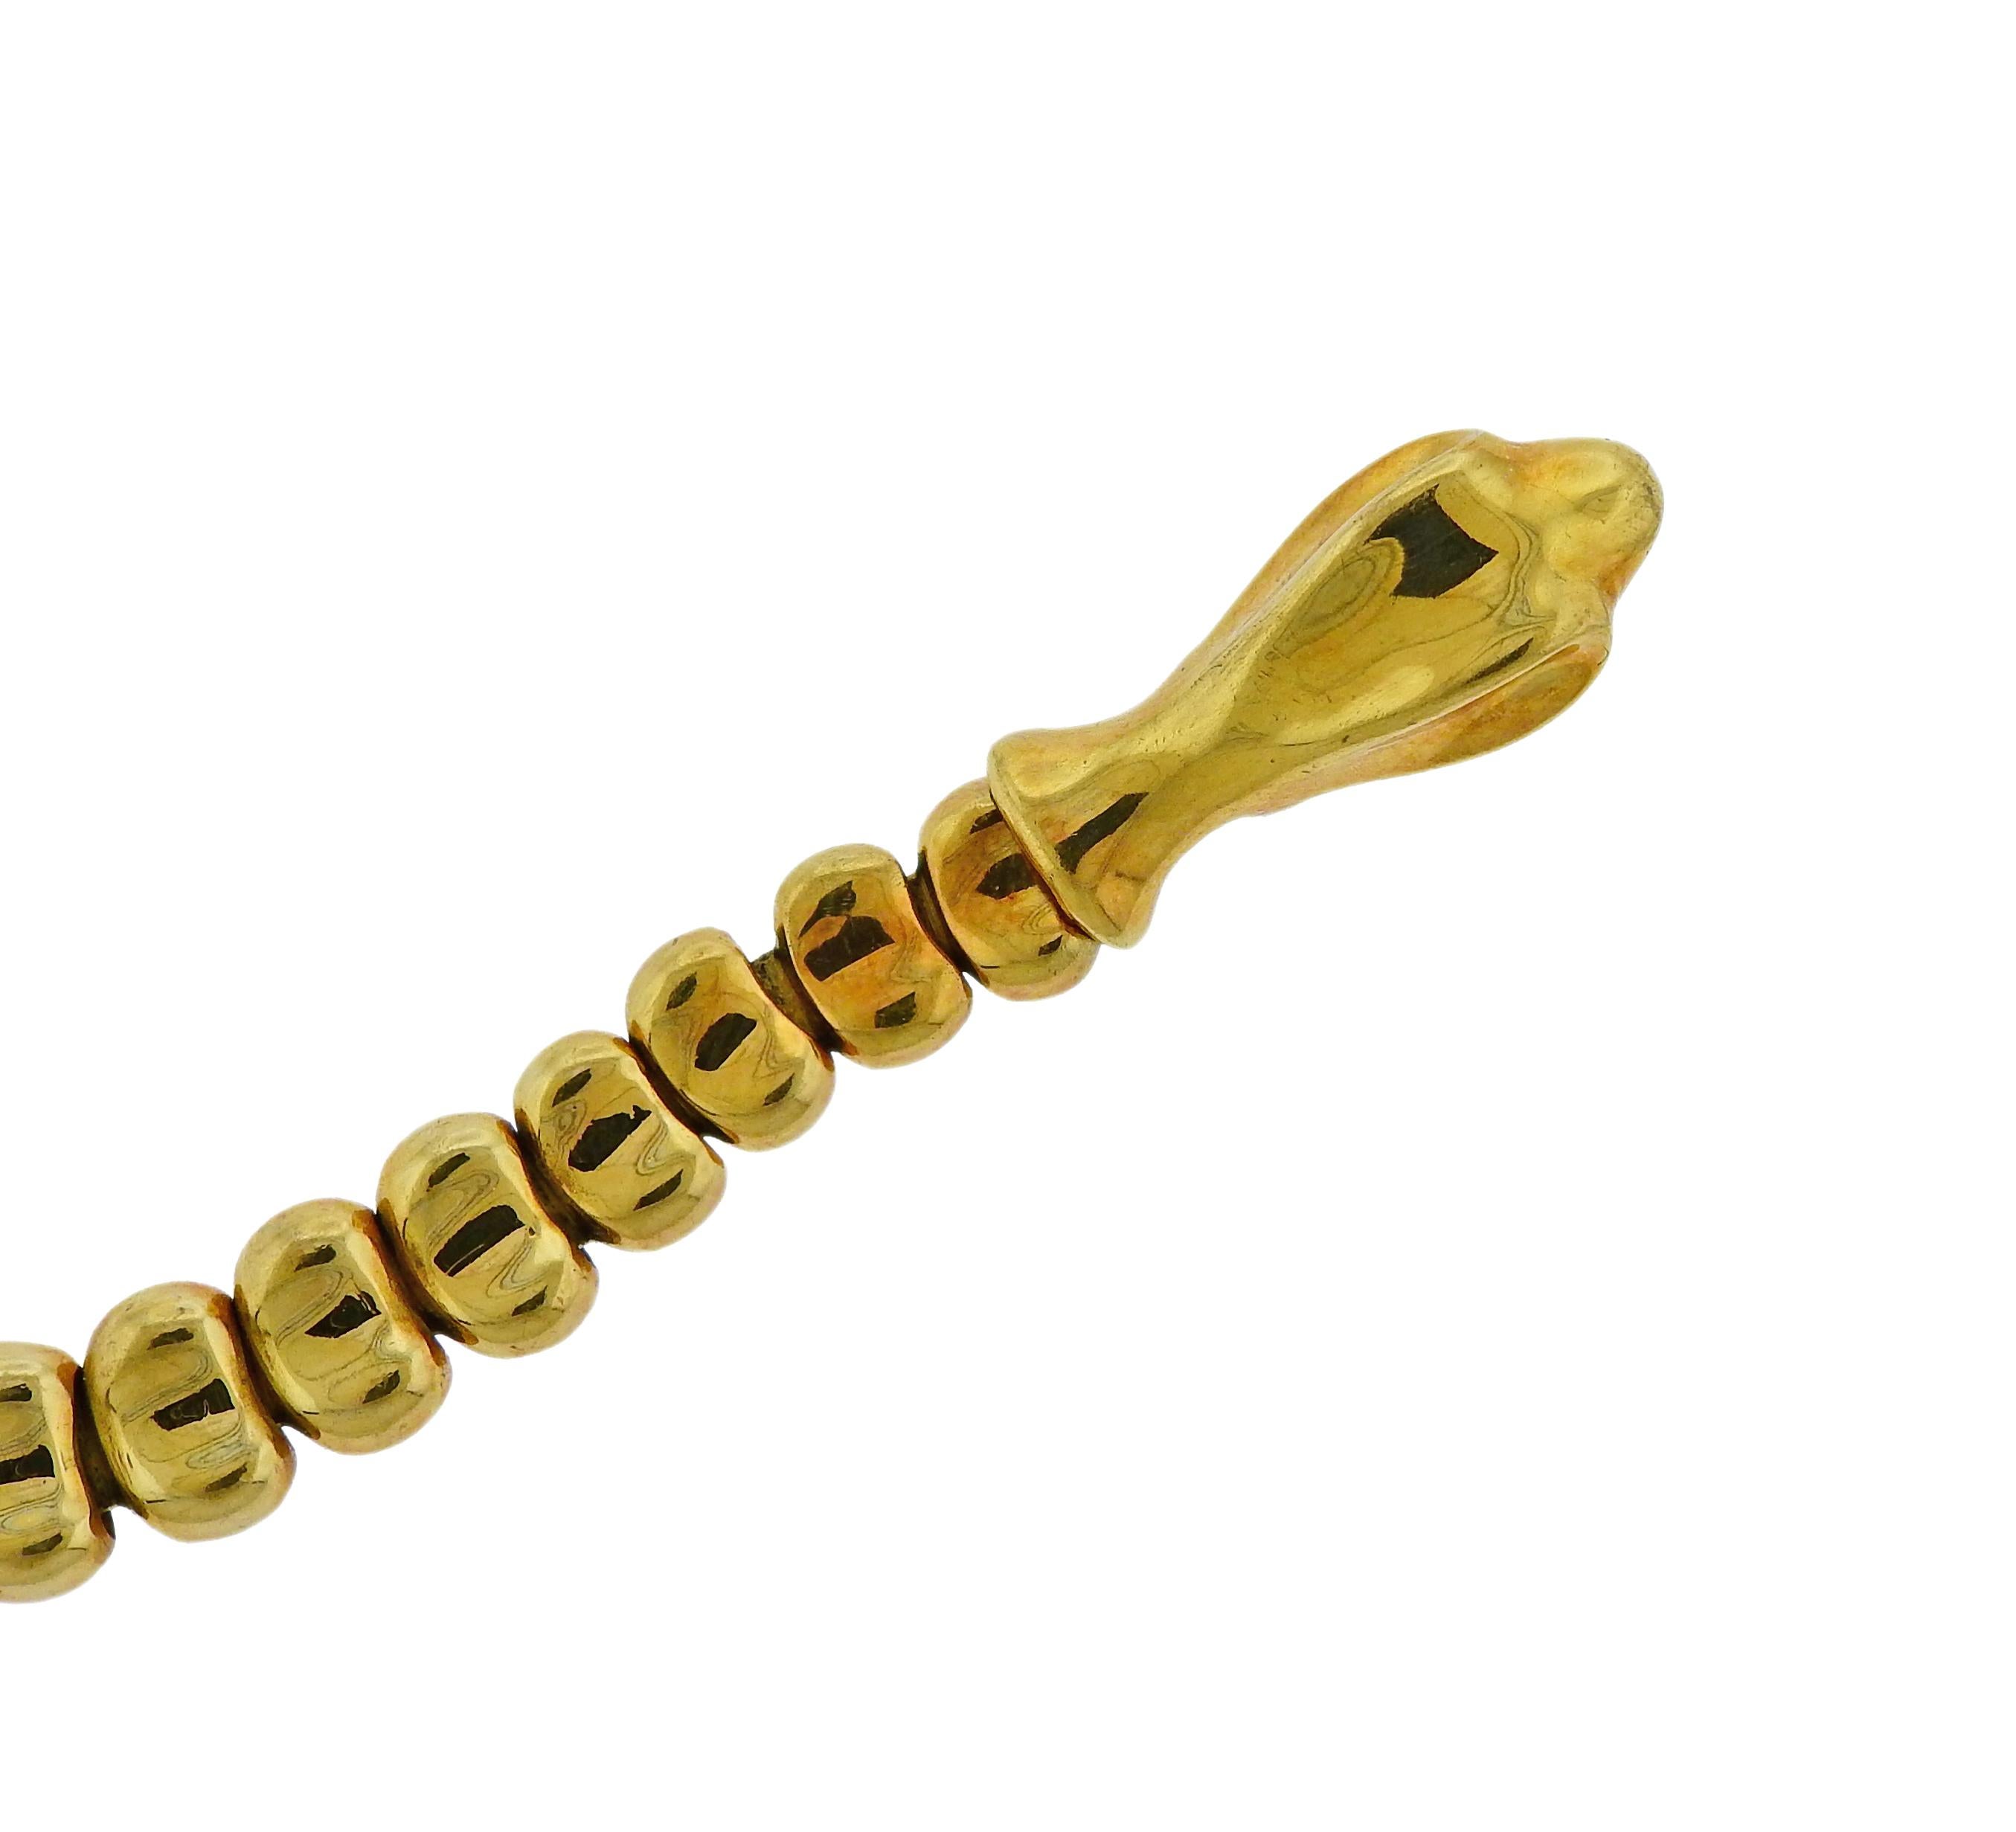 Rare 18k yellow gold snake bracelet by Elsa Peretti, crafted for Tiffany & Co. Bracelet is 8 5/8